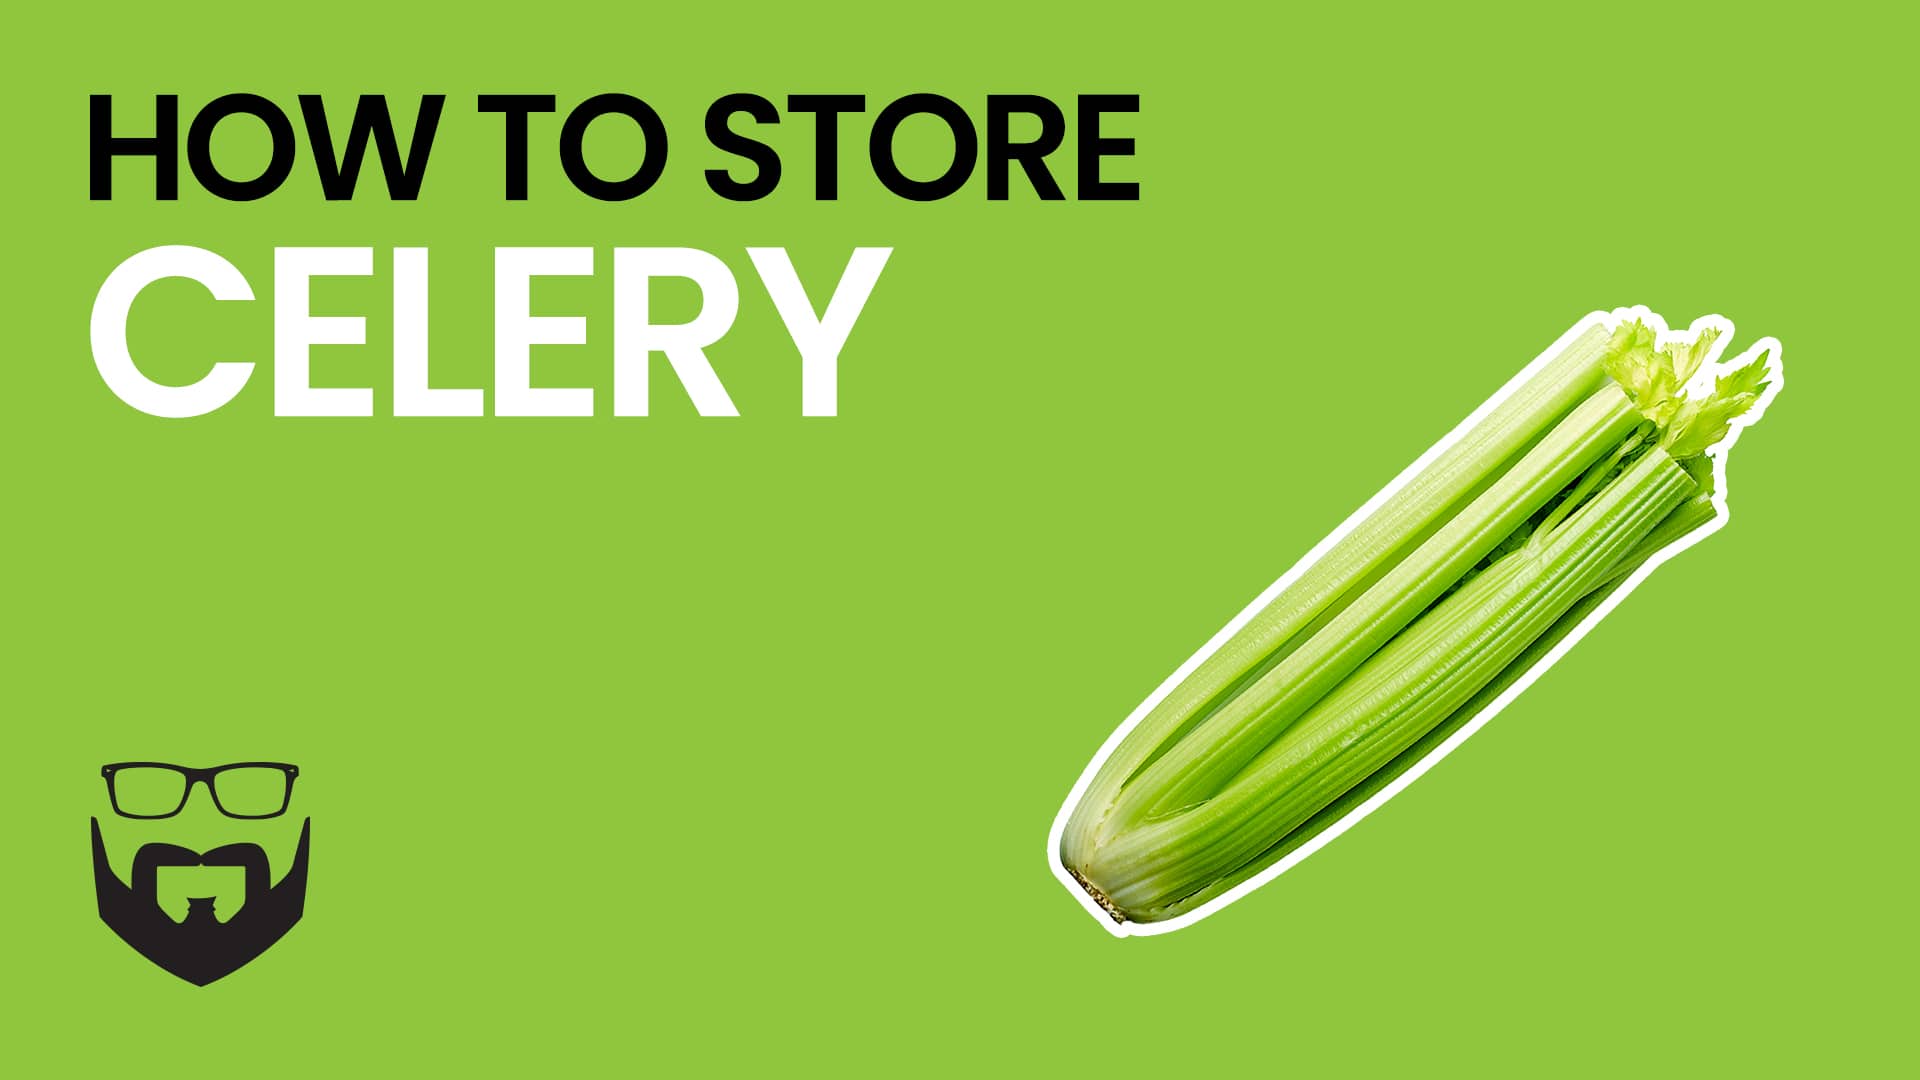 How to Store Celery Video - Green